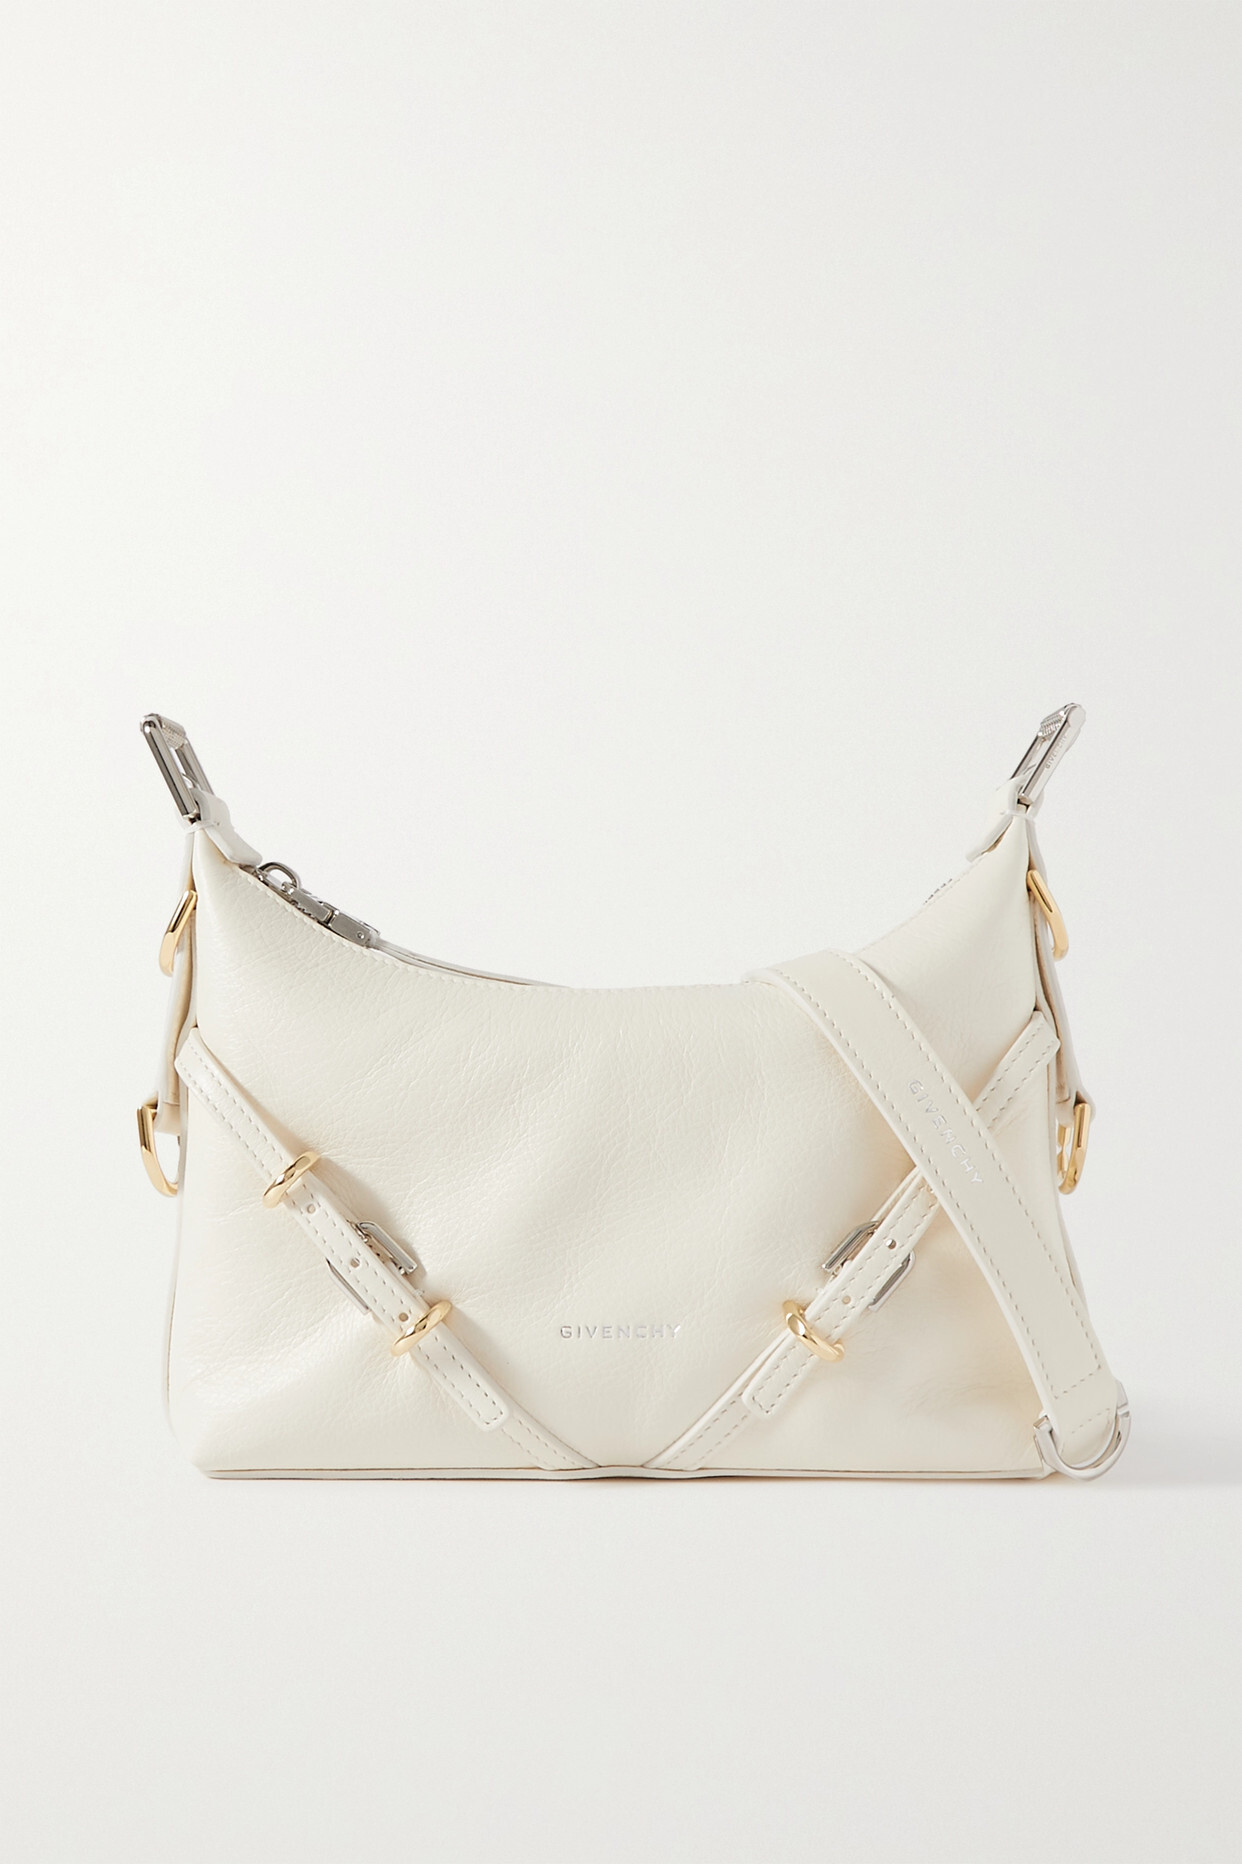 Givenchy - Voyou Mini Textured-leather Shoulder Bag - White